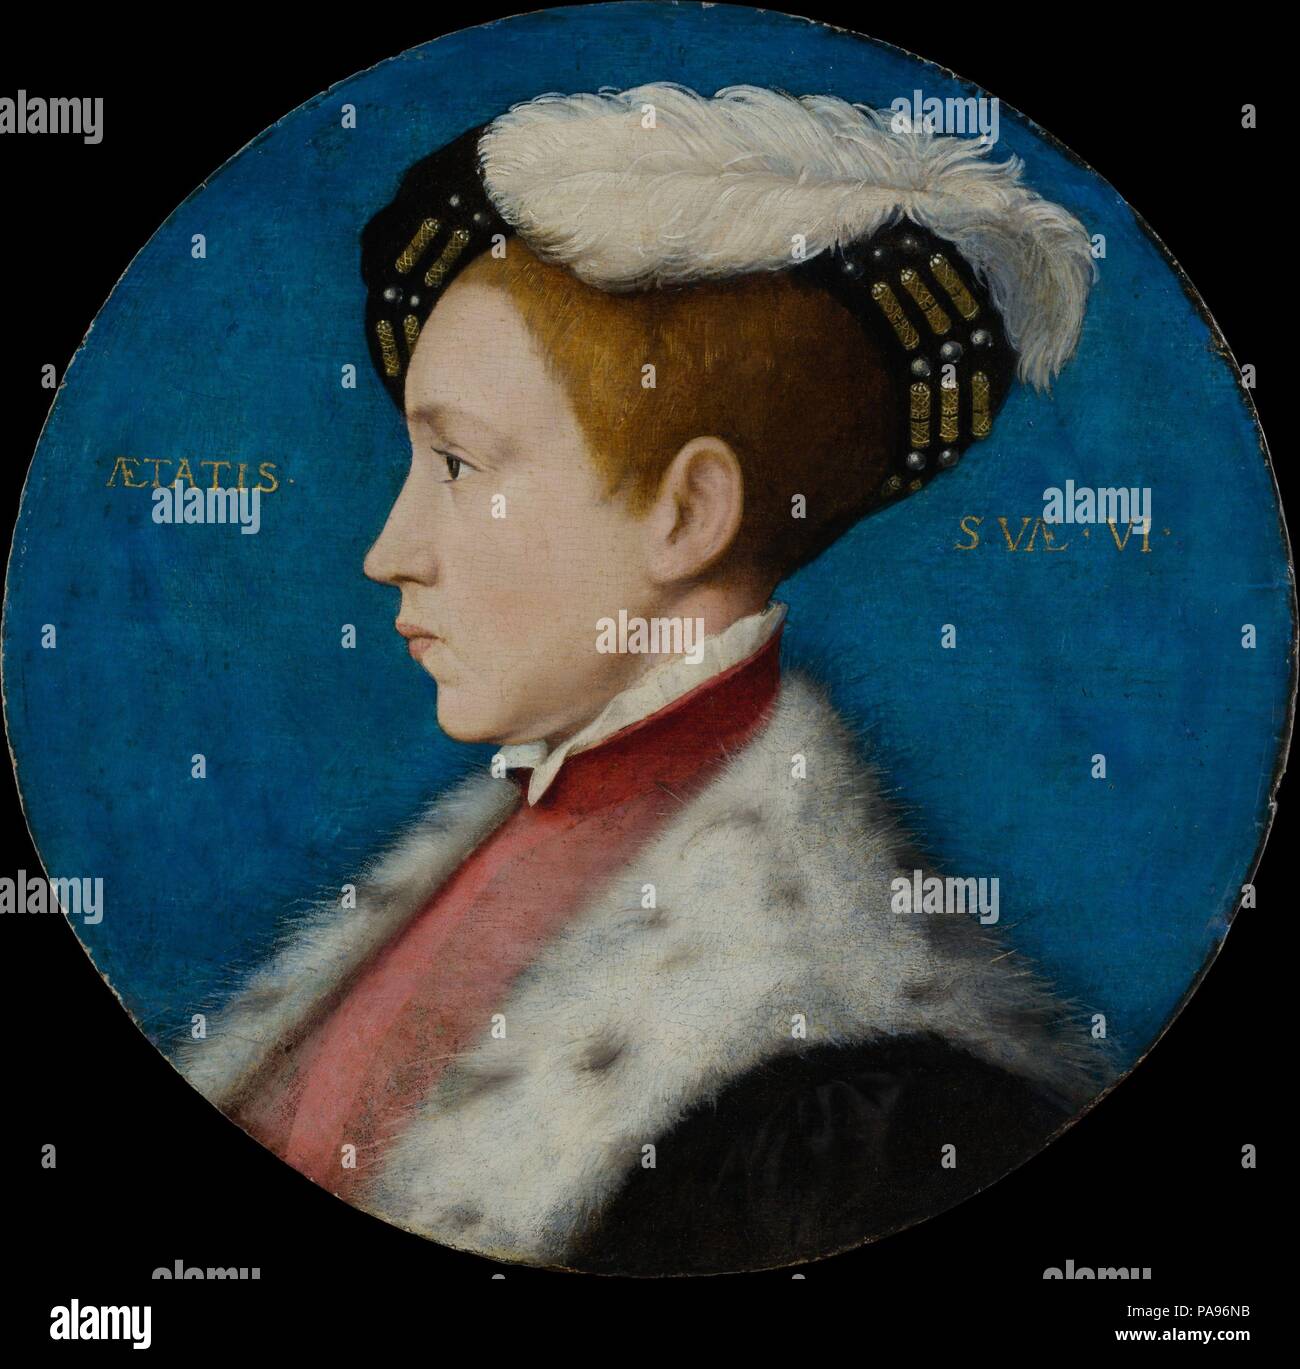 Edward VI (1537-1553), When Duke of Cornwall. Artist: Workshop of Hans Holbein the Younger. Dimensions: Diameter 12 3/4 in. (32.4 cm). Date: ca. 1545; reworked 1547 or later.  Edward, the sole legitimate son of Henry VIII, was born on October 12, 1537 and crowned Edward VI in 1547. This portrait shows the future king at age six, when he was still the Duke of Cornwall. It was subsequently adapted in costume to reflect Edward's stature at the time of his coronation. The roundel format and the sitter's profile pose evoke the coinage of classical antiquity, admired at the Tudor court. The panel wa Stock Photo